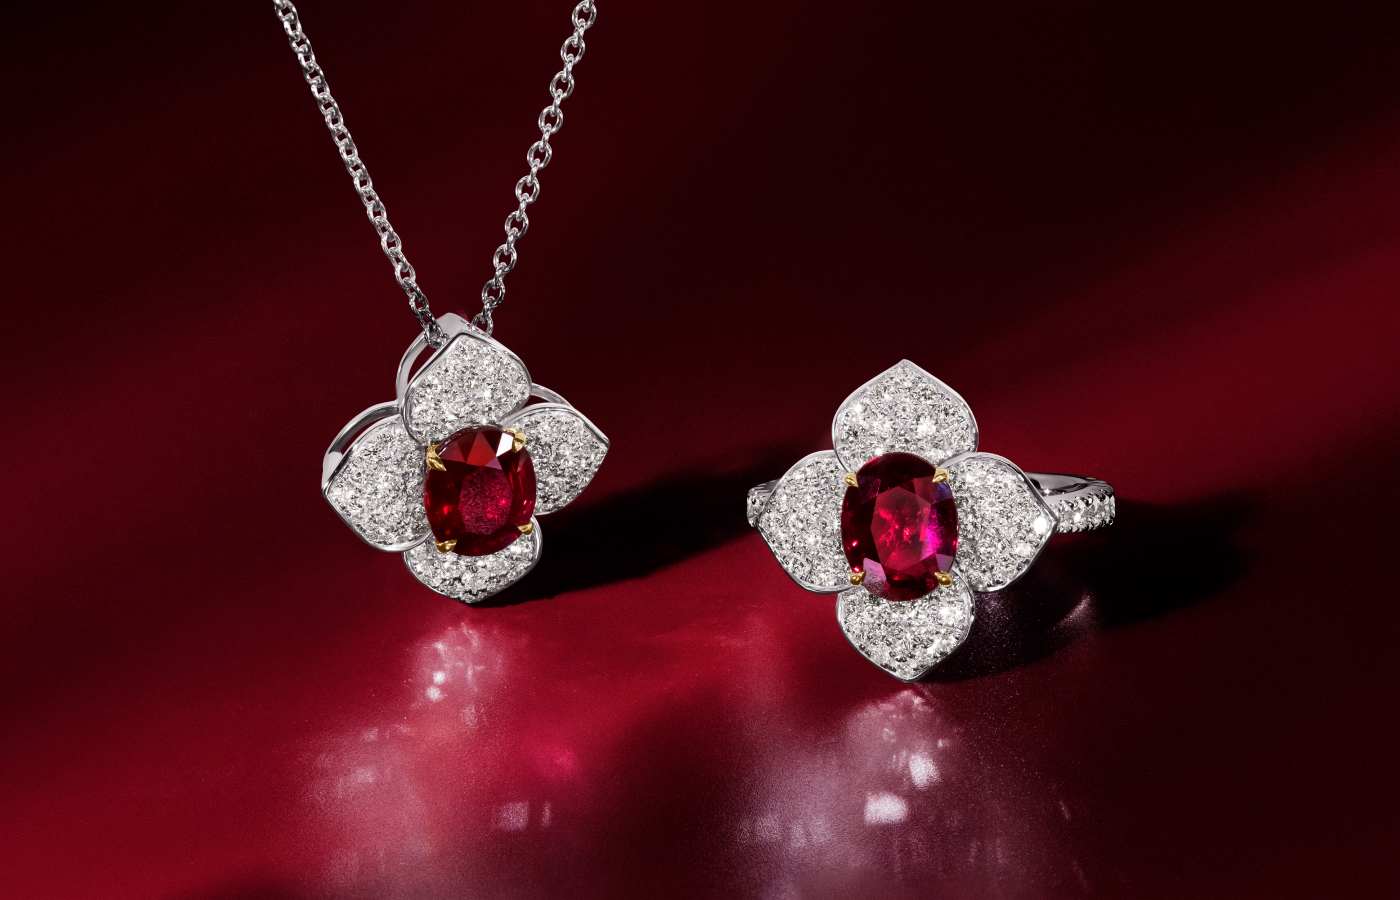 Le Vian Couture® pendant with a 2.2 carat Passion Ruby™ and Vanilla Diamonds® set in platinum with 18K Honey Gold™ alongside a matching ring with a 2.2 carat Passion Ruby™ and one carat of Vanilla Diamonds®